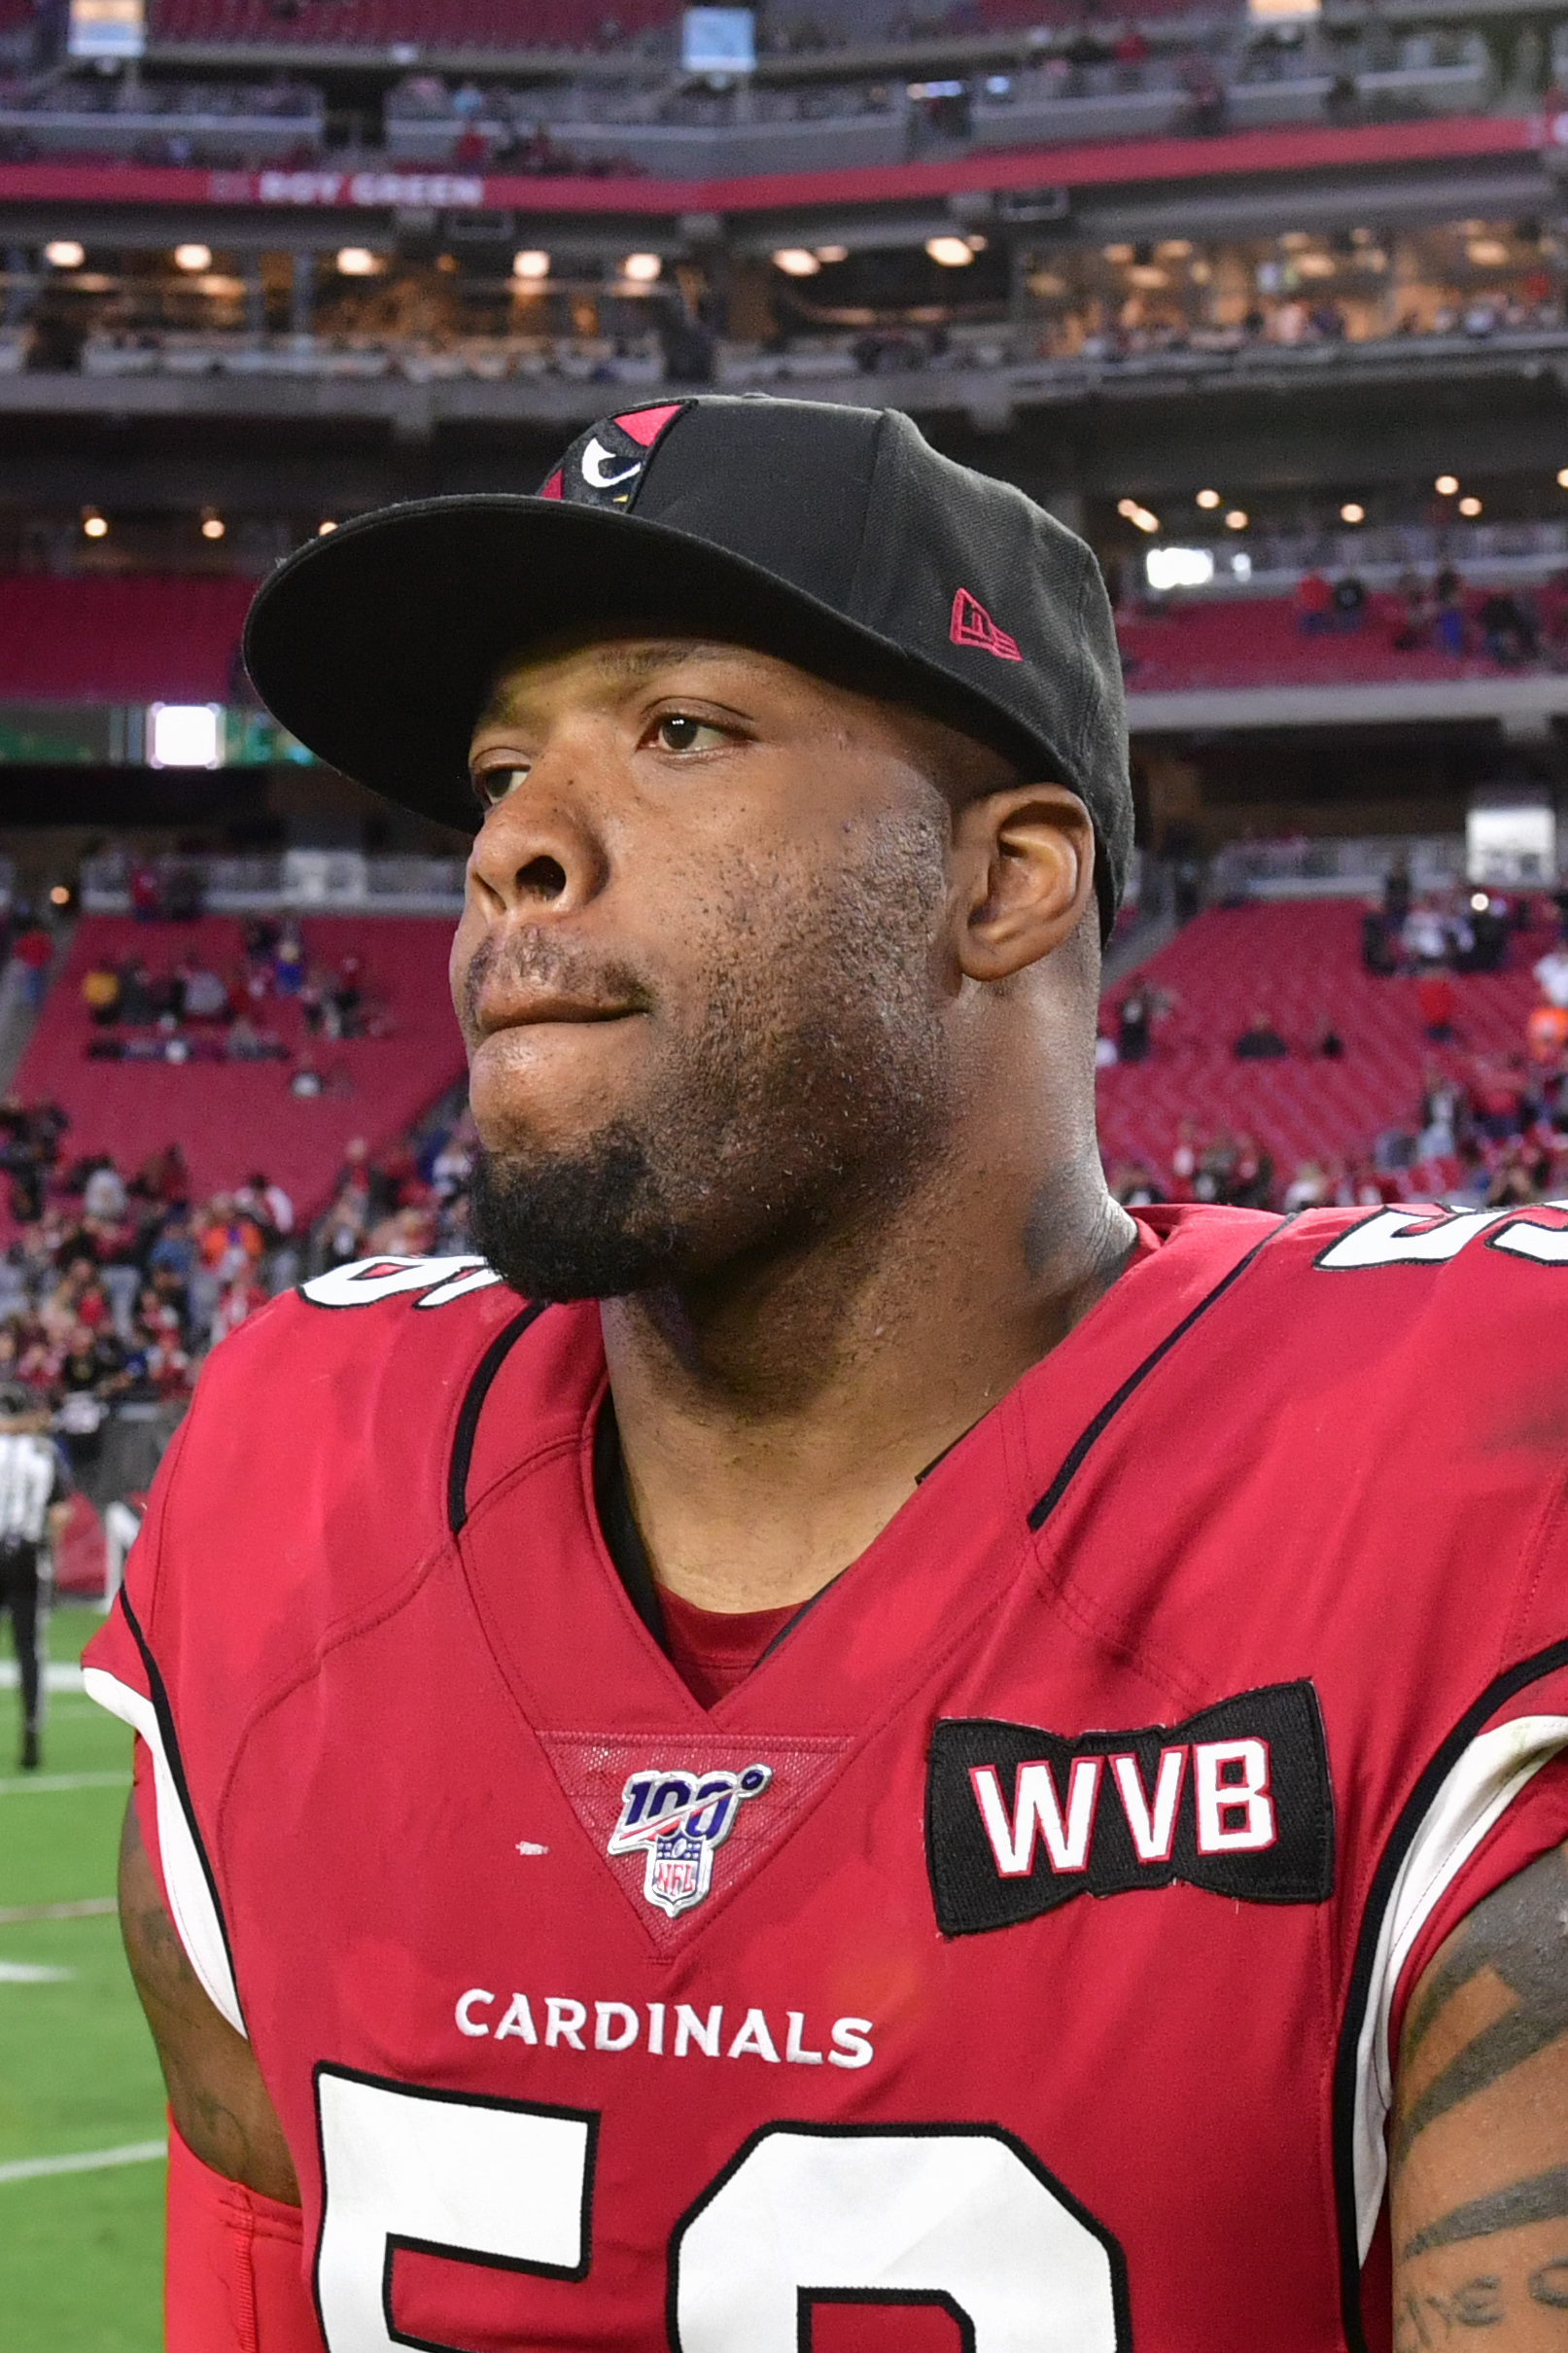 Report: Terrell Suggs leaving Ravens after 16 years, joining Cardinals